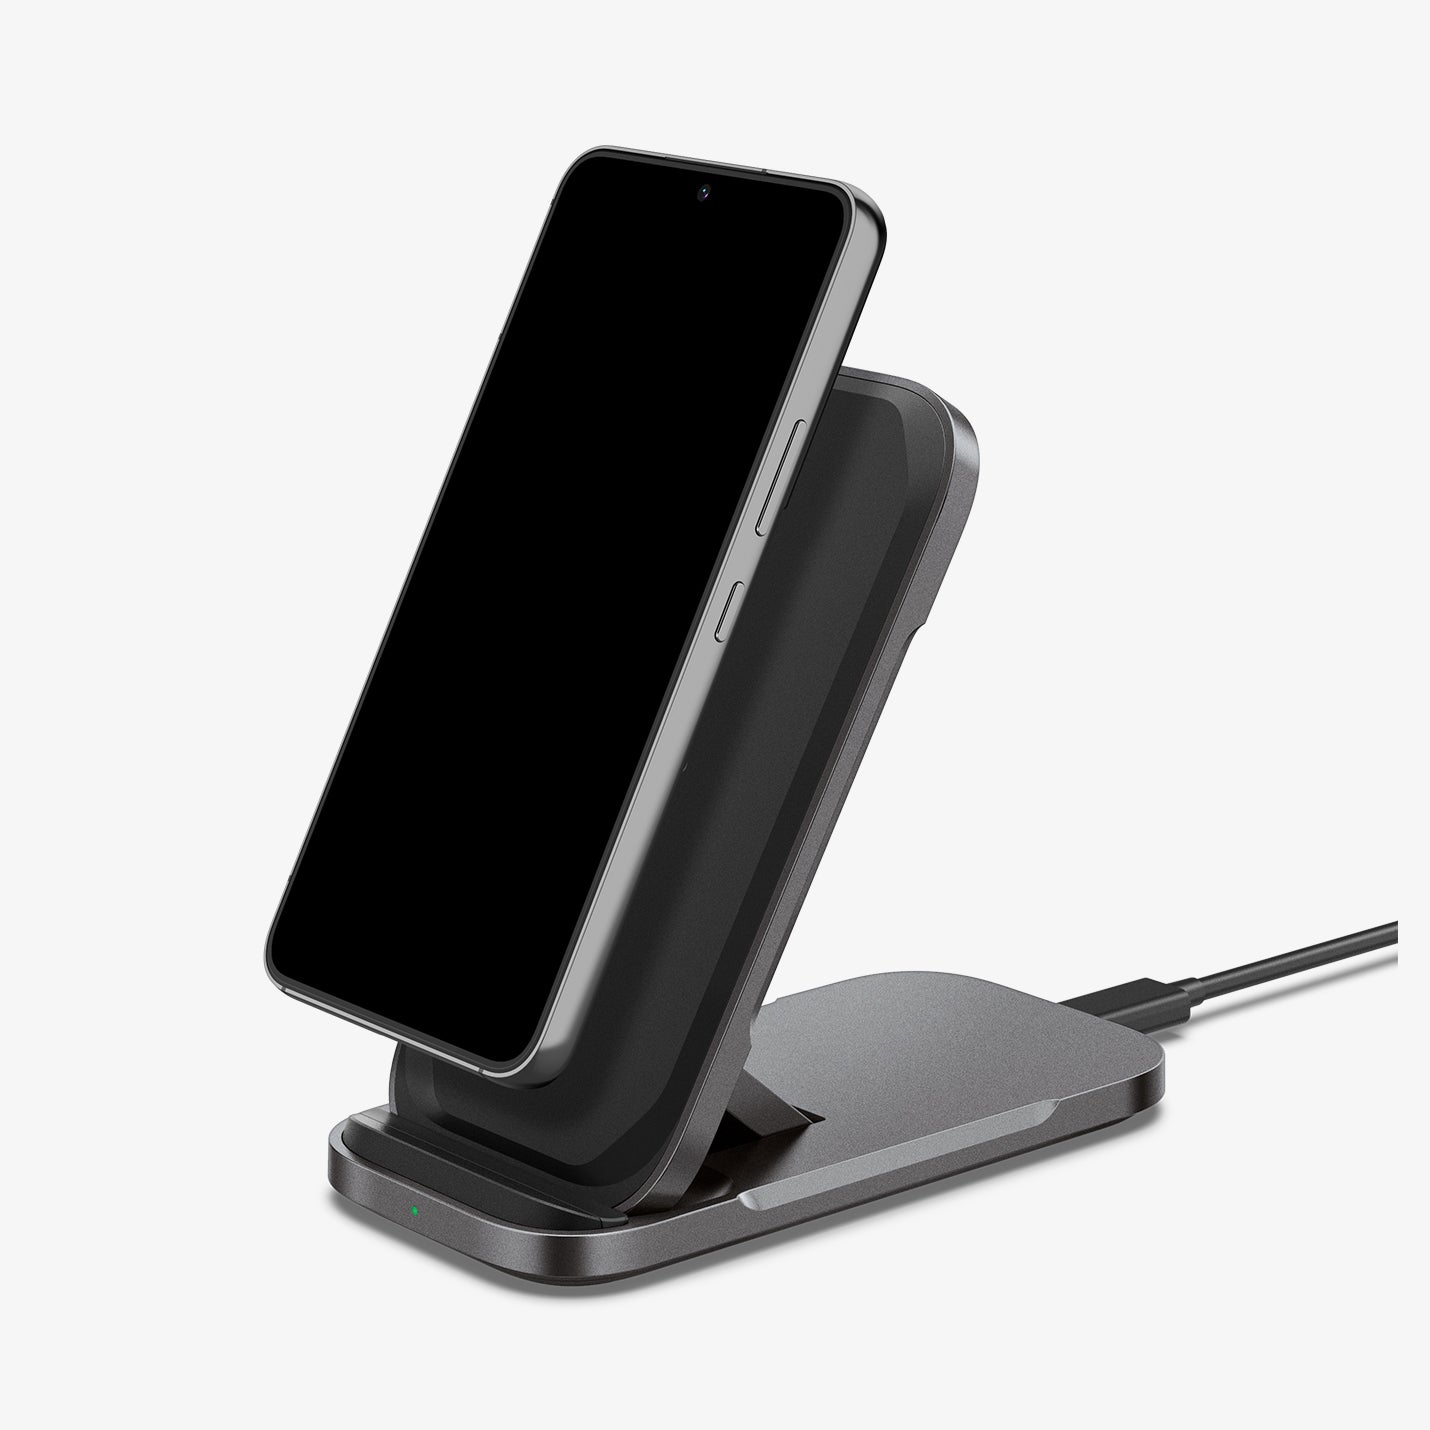 ACH04622 - ArcField™ Flex Wireless Charger PF2201 in black showing the front and side with phone hovering slightly in front